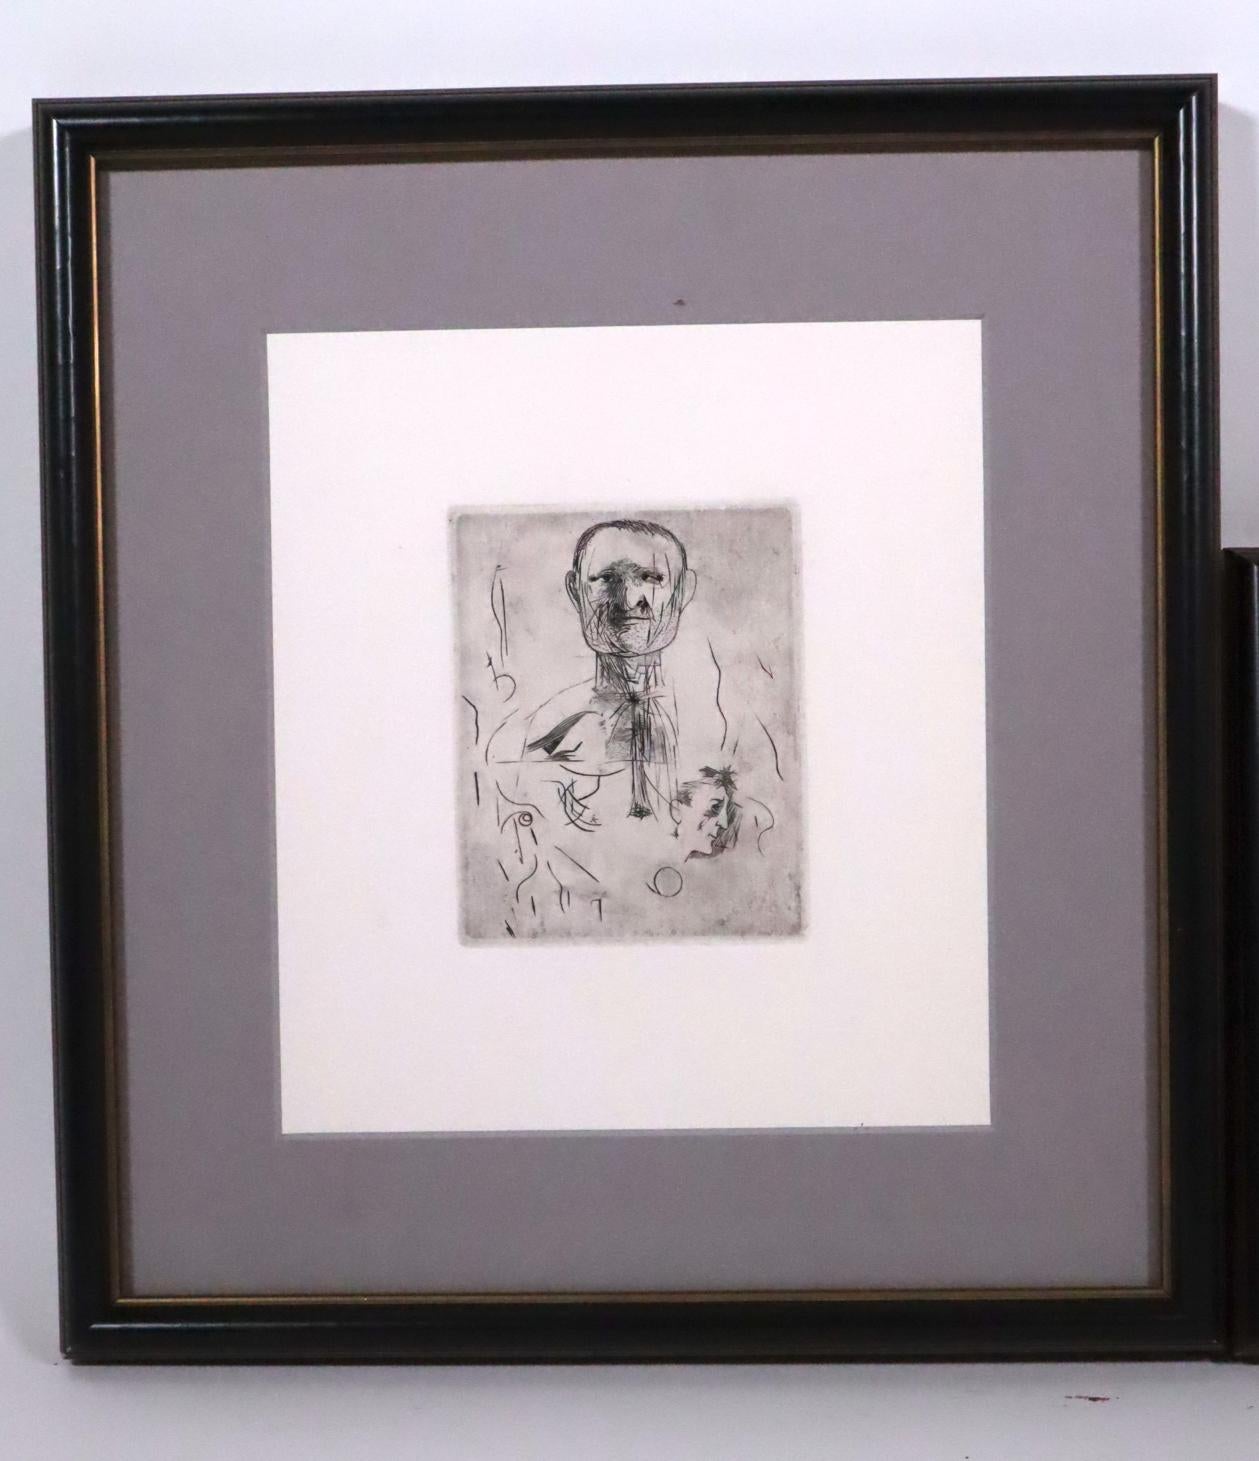 Three framed etchings, trial proofs INVENTORY CLEARANCE SALE - Print by Leonard Baskin